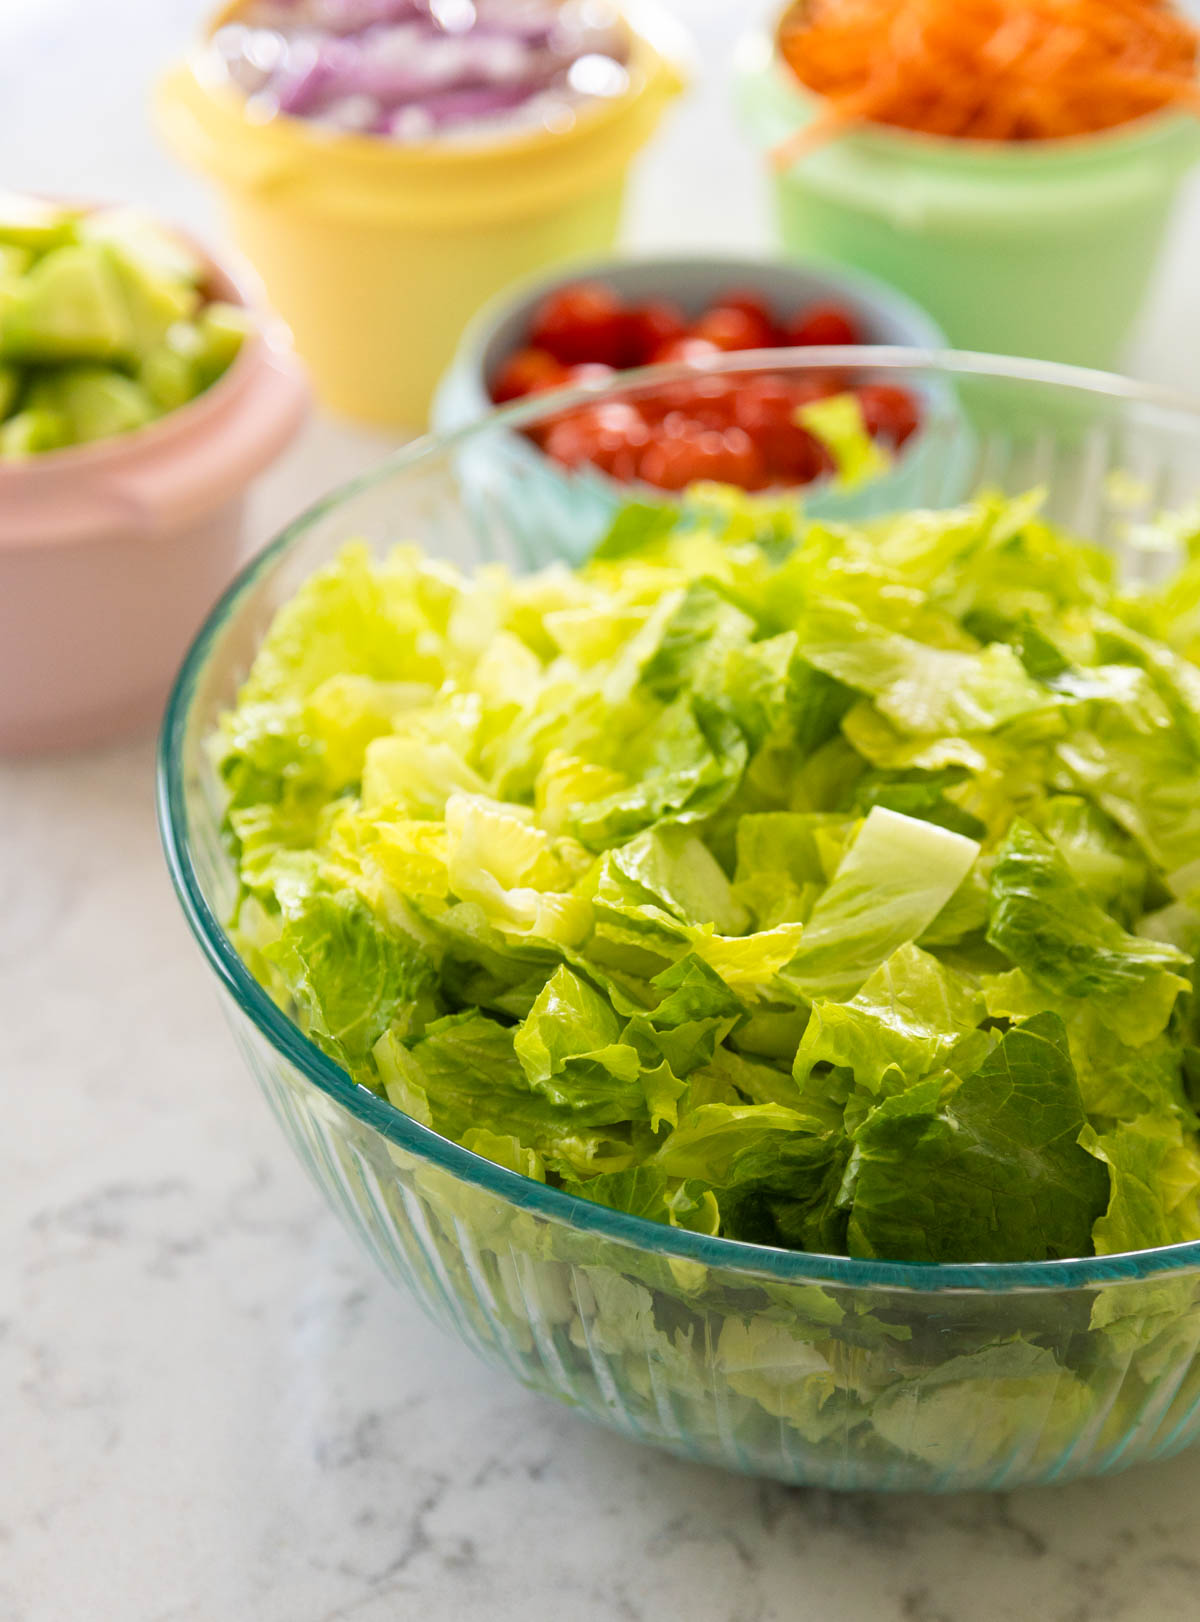 A big bowl of chopped lettuce sits in front of the other vegetables in small bowls.